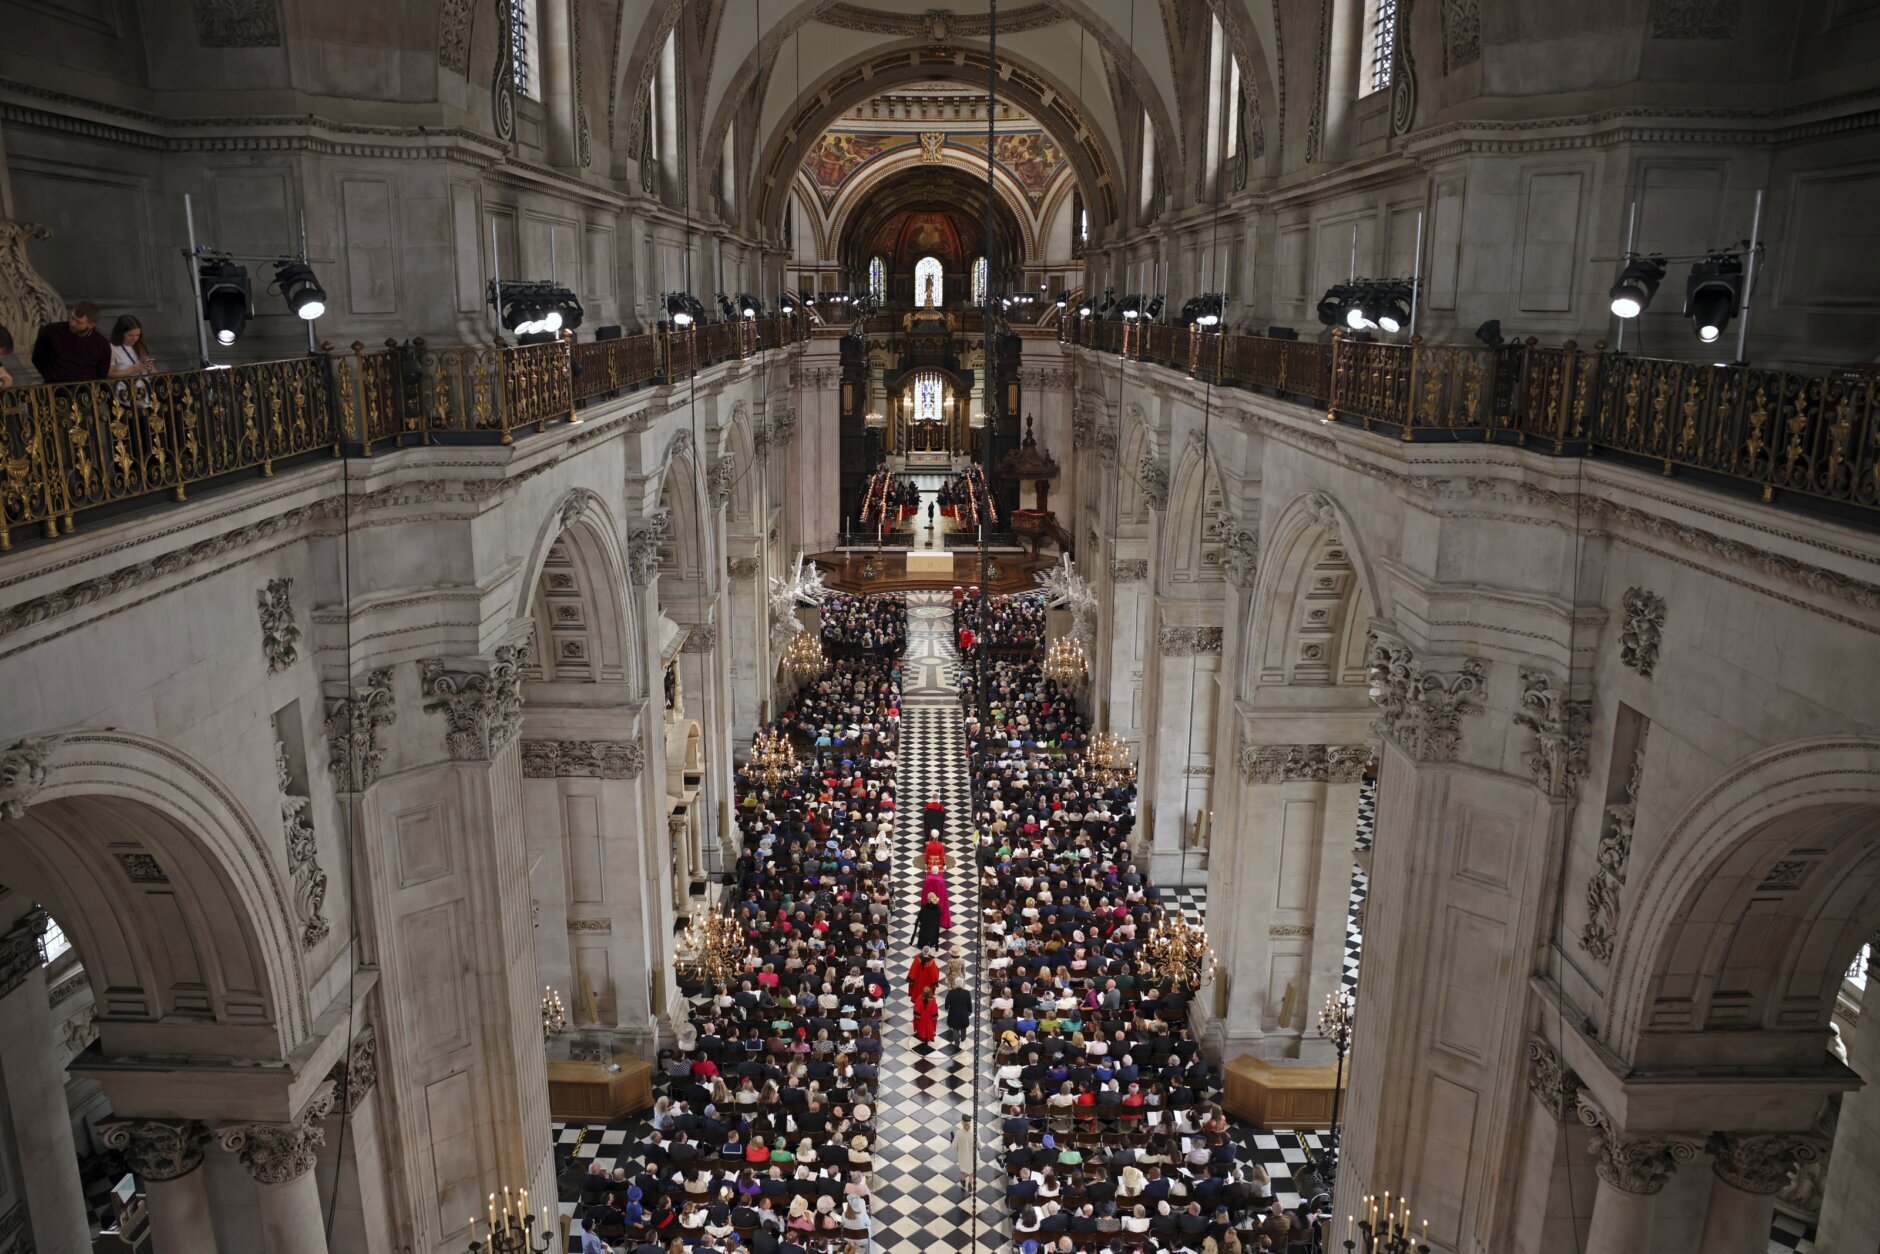 A general view ahead of a service of thanksgiving for the reign of Queen Elizabeth II at St Paul’s Cathedral in London, Friday June 3, 2022 on the second of four days of celebrations to mark the Platinum Jubilee. The events over a long holiday weekend in the U.K. are meant to celebrate the monarch’s 70 years of service. (Dan Kitwood/Pool Photo via AP)